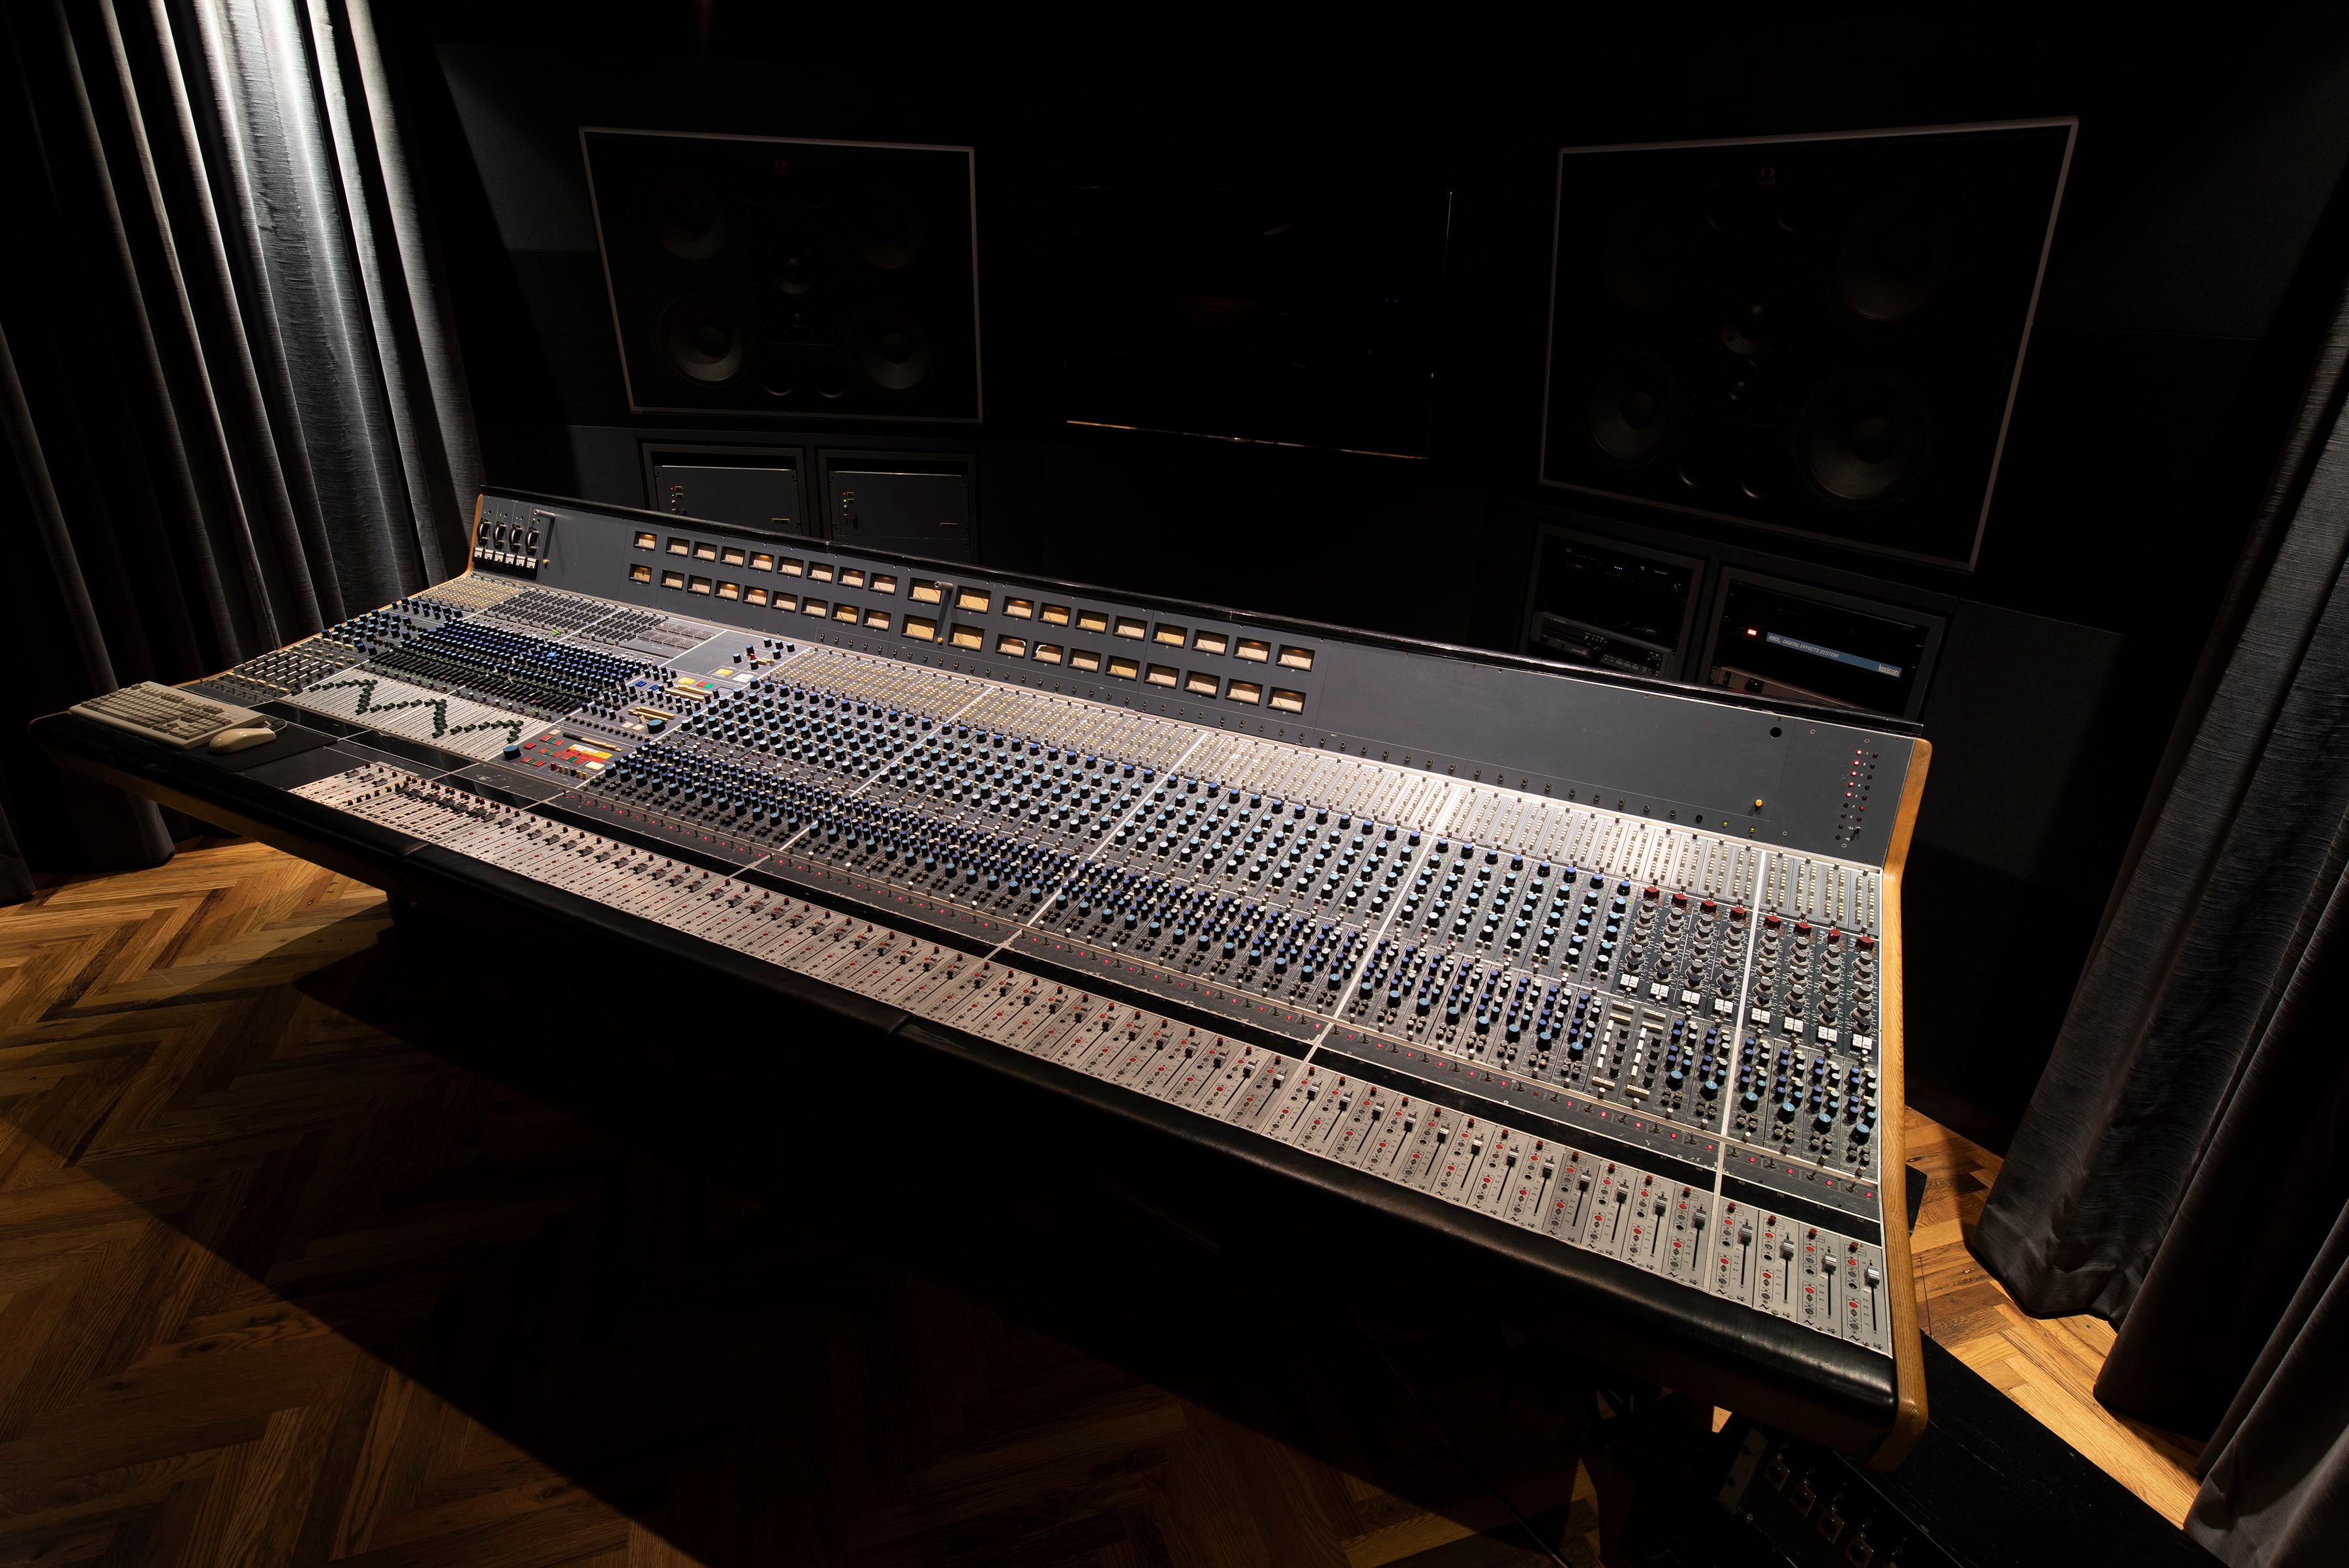 Every little thing it does is magic: A revered sound board and its